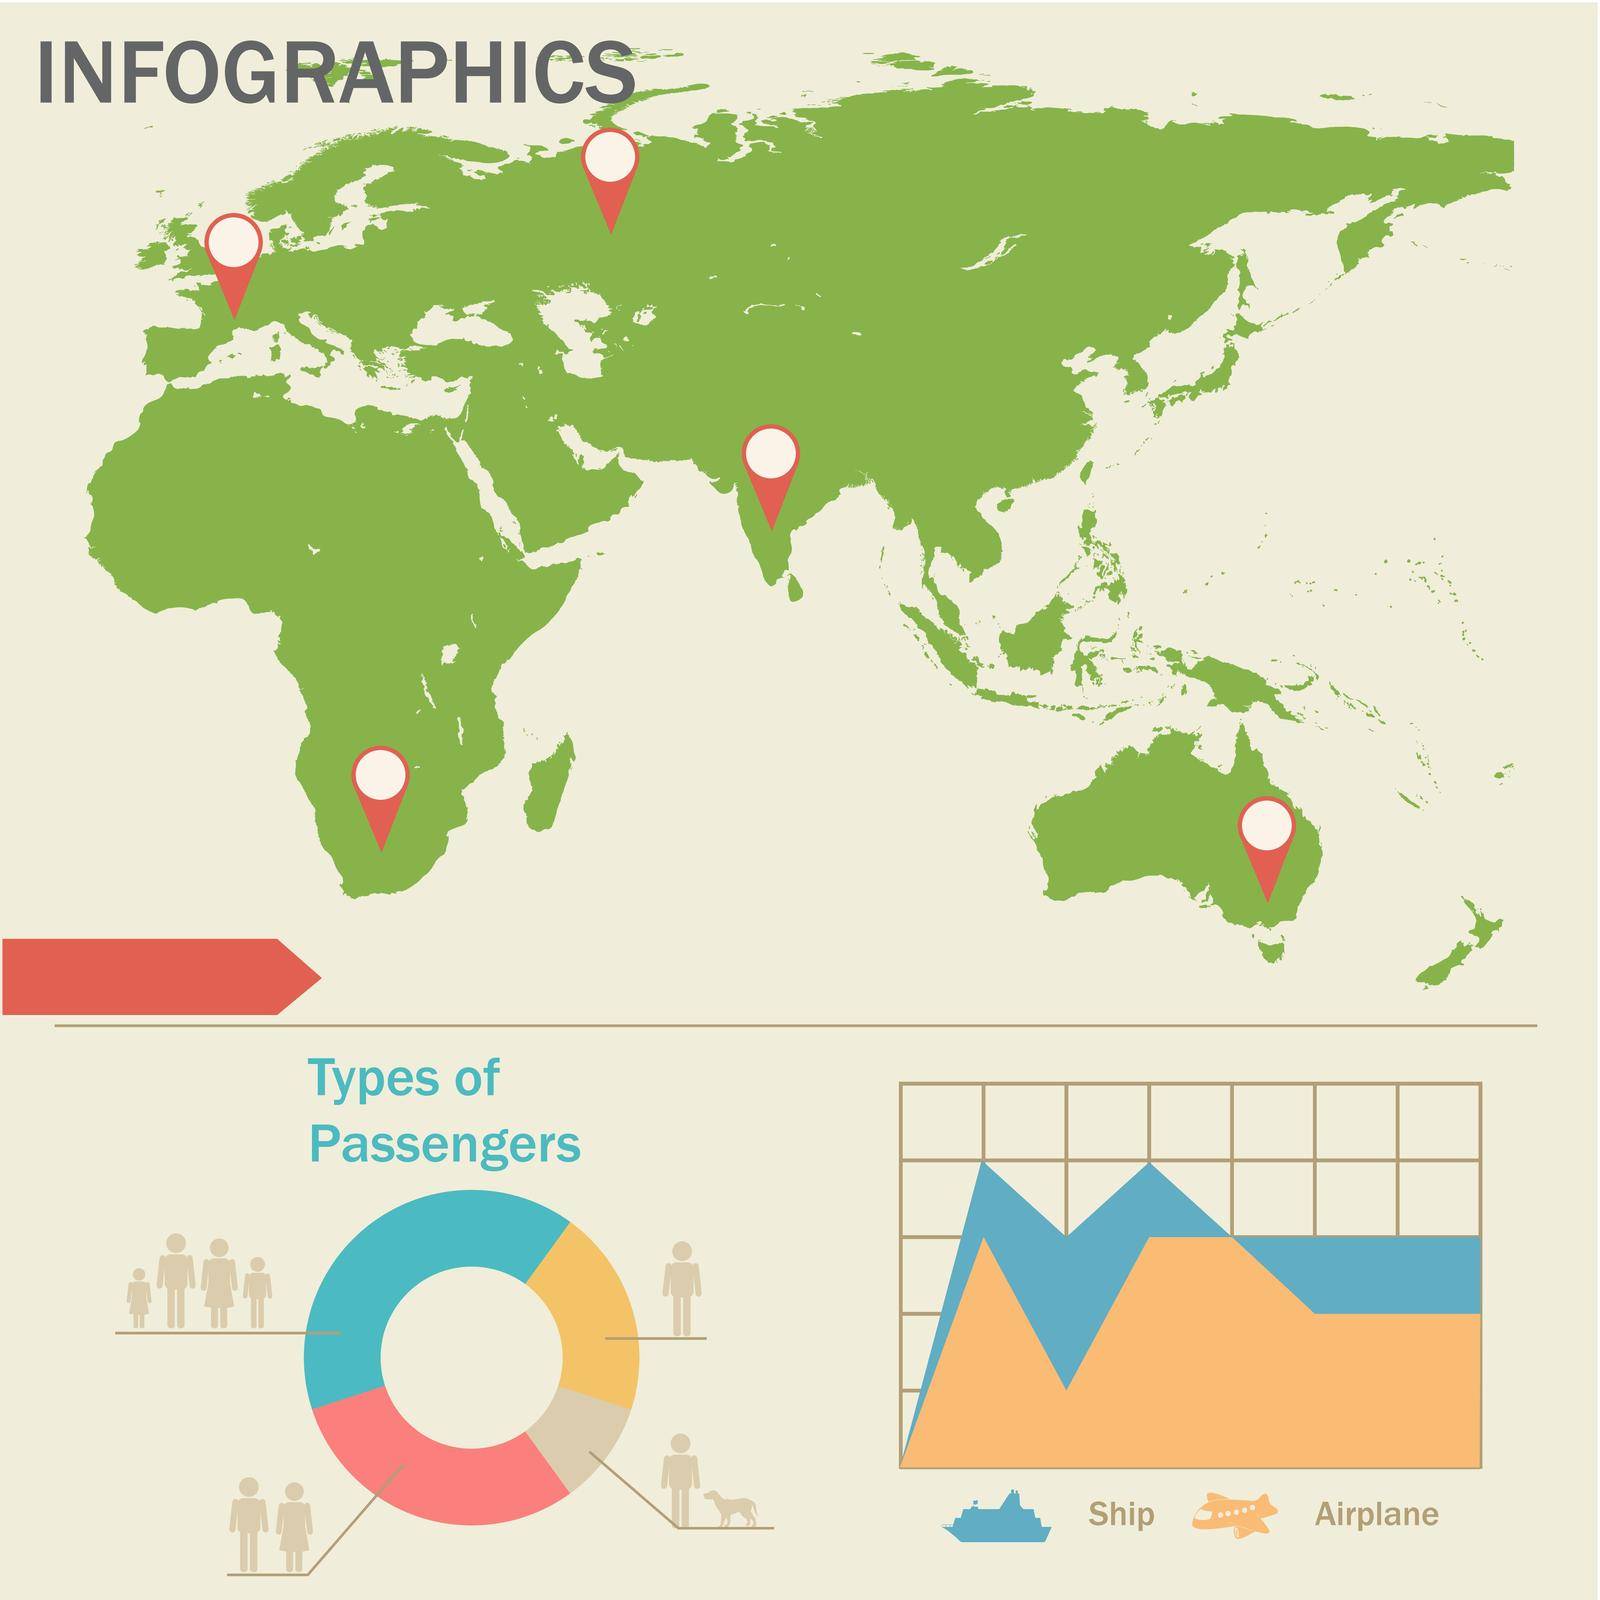 An infographics with a map showing the different locations